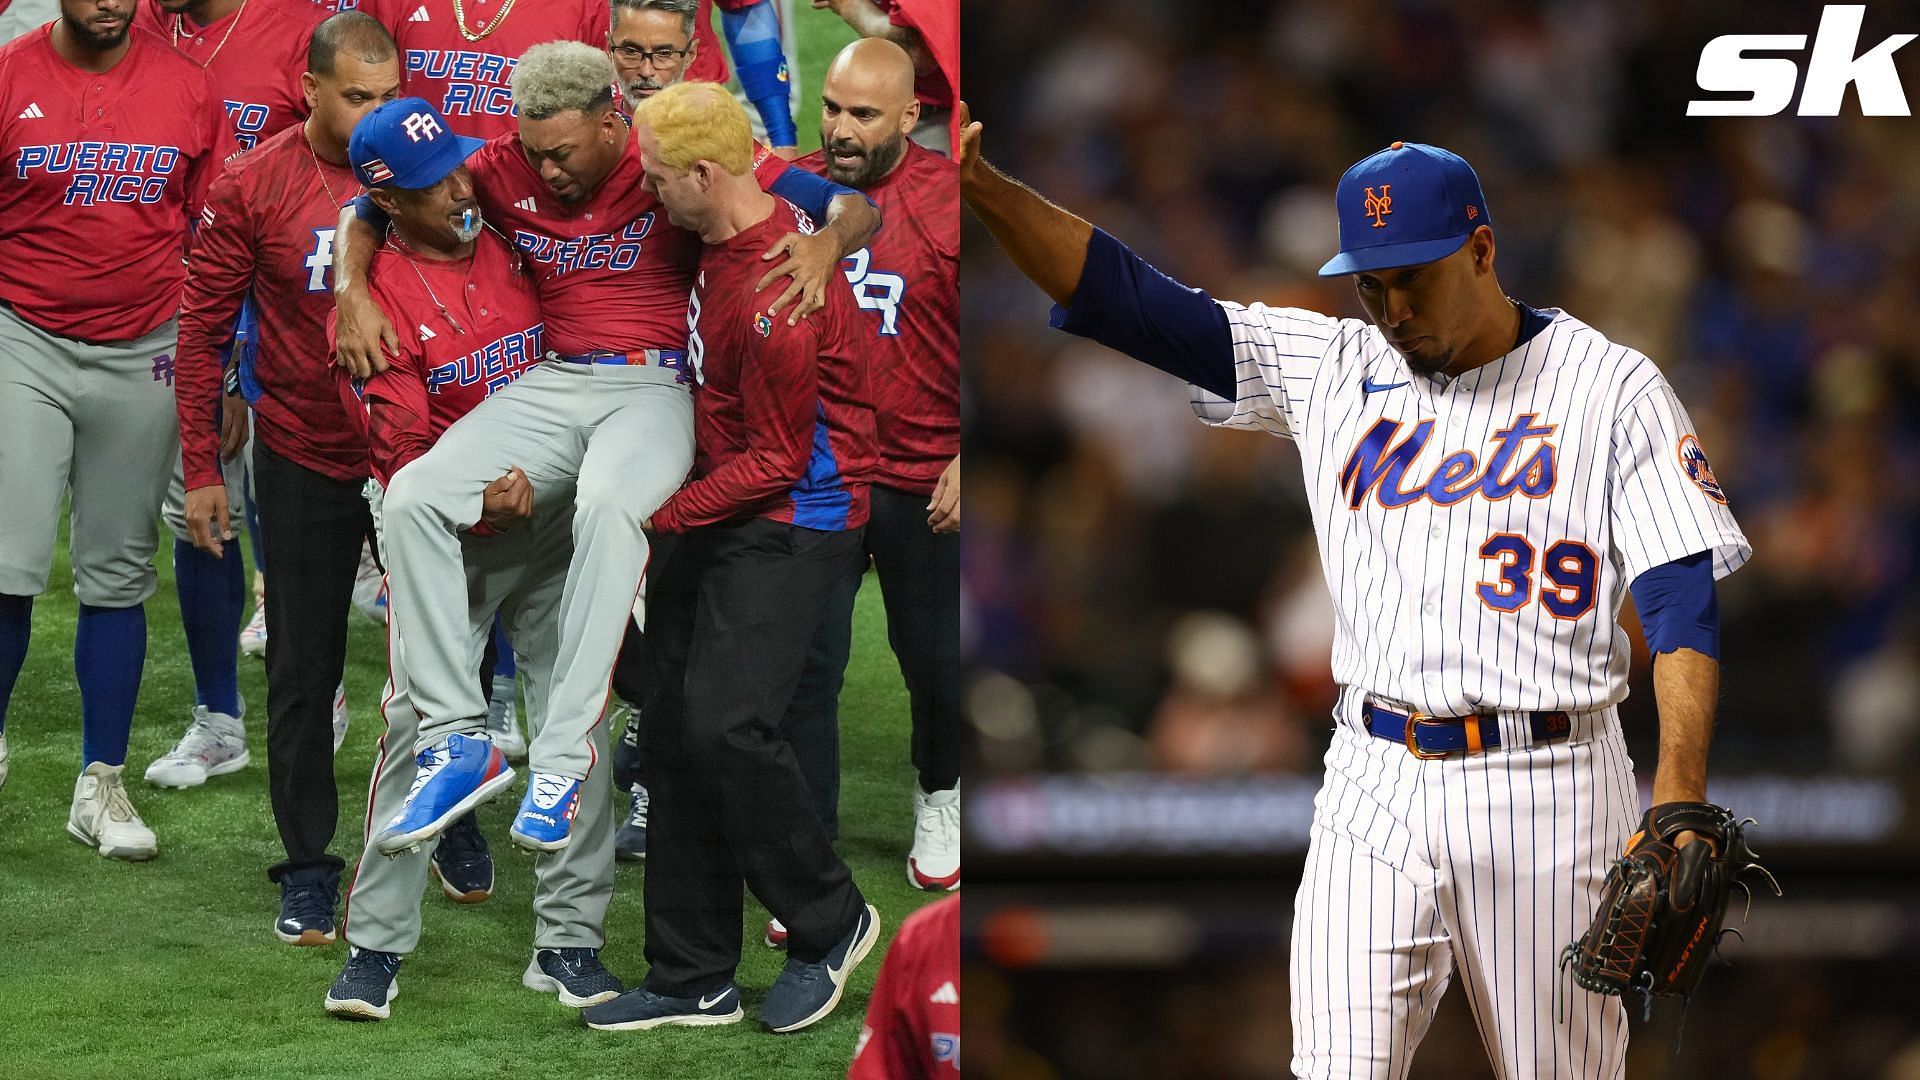 Another encouraging injury update for Mets' Edwin Diaz  from